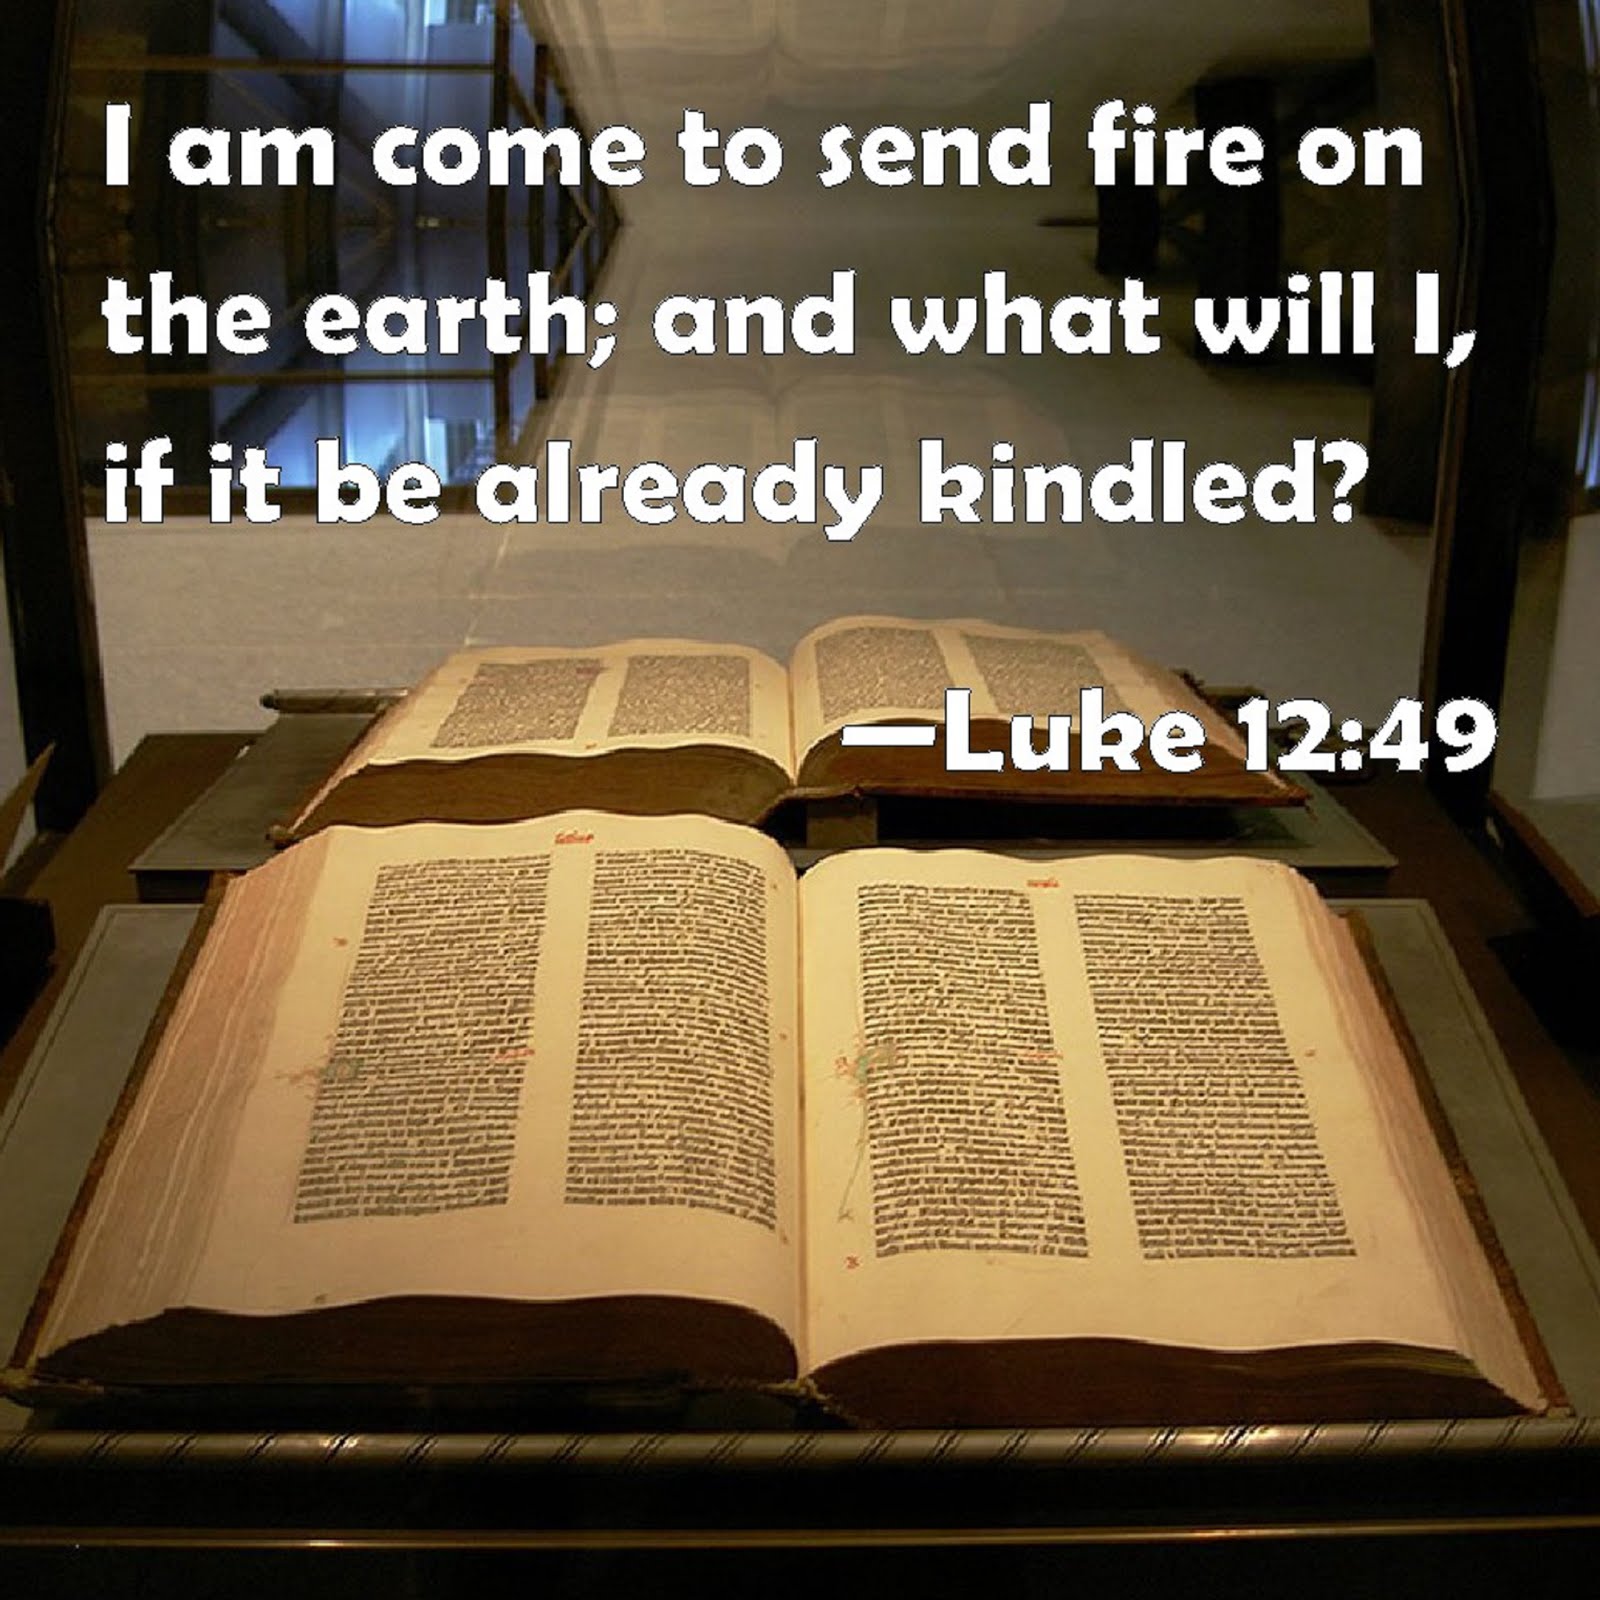 I HAVE COME TO SEND FIRE ON THE EARTH  AND WHAT WILL IF IT ALREADY BE KINDLED